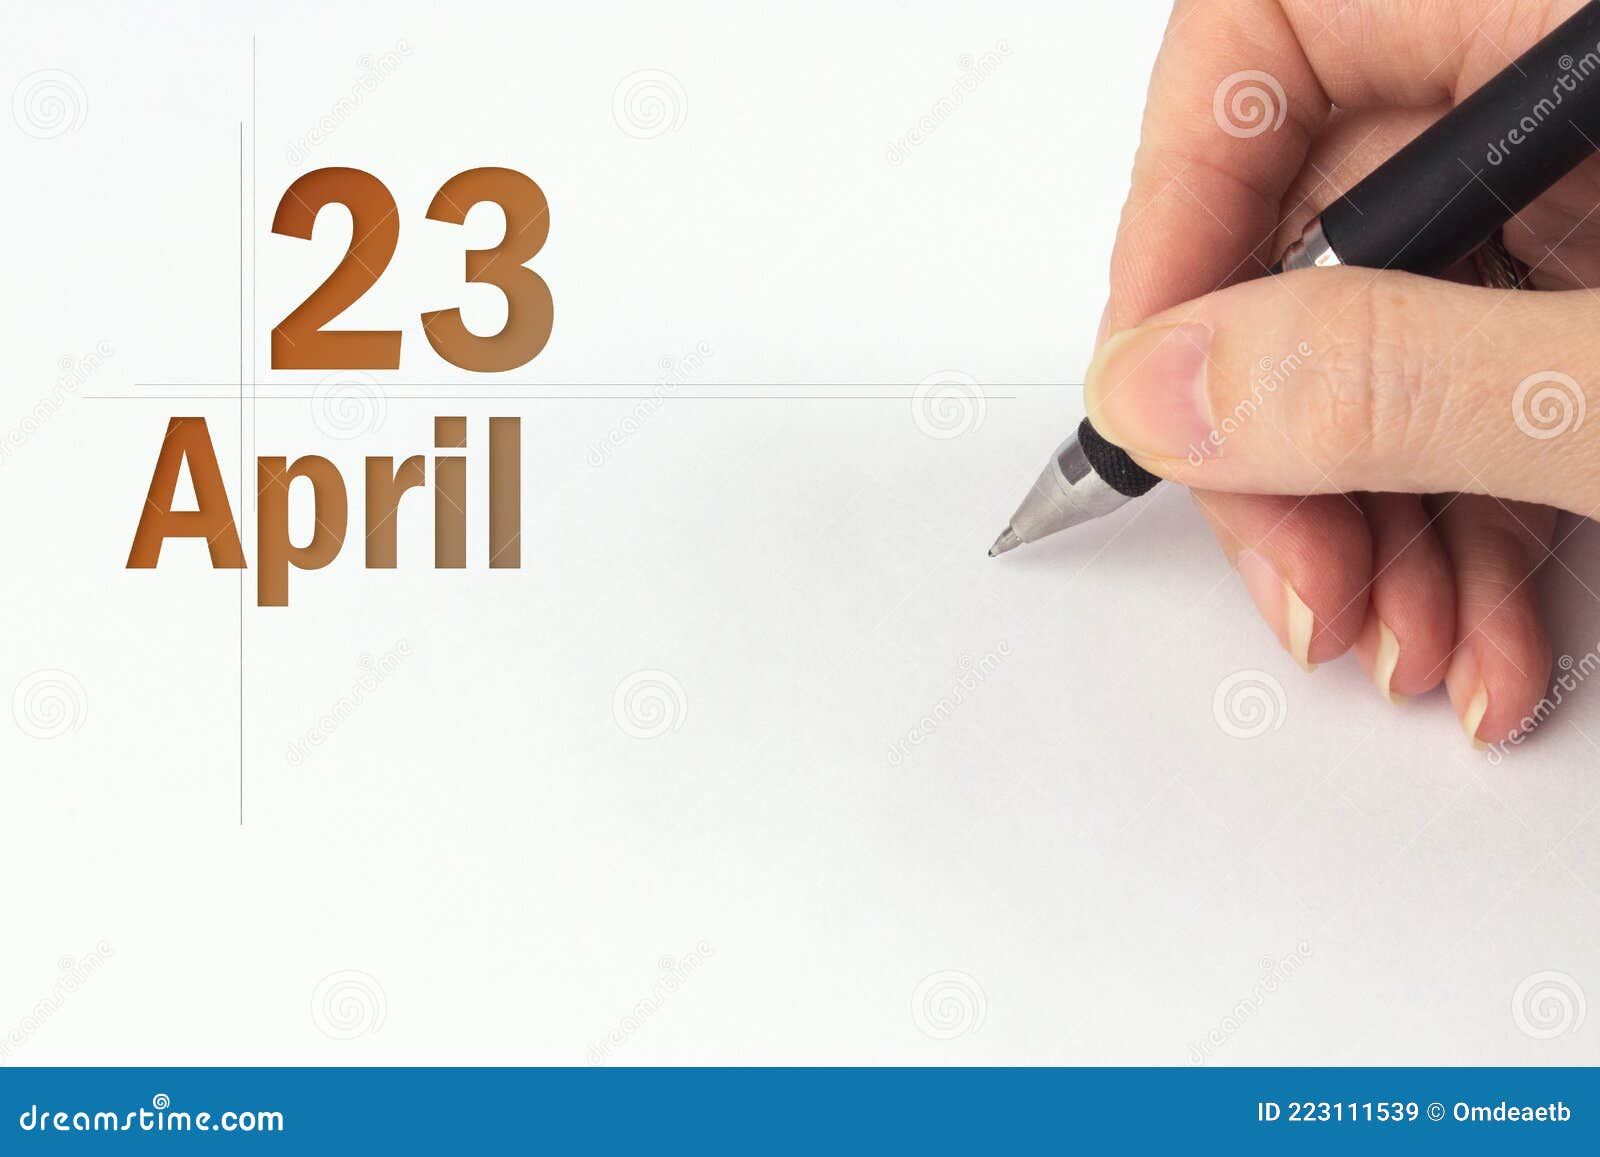 April 23rd Day 23 Of Month Calendar Date The Hand Holds A Black Pen